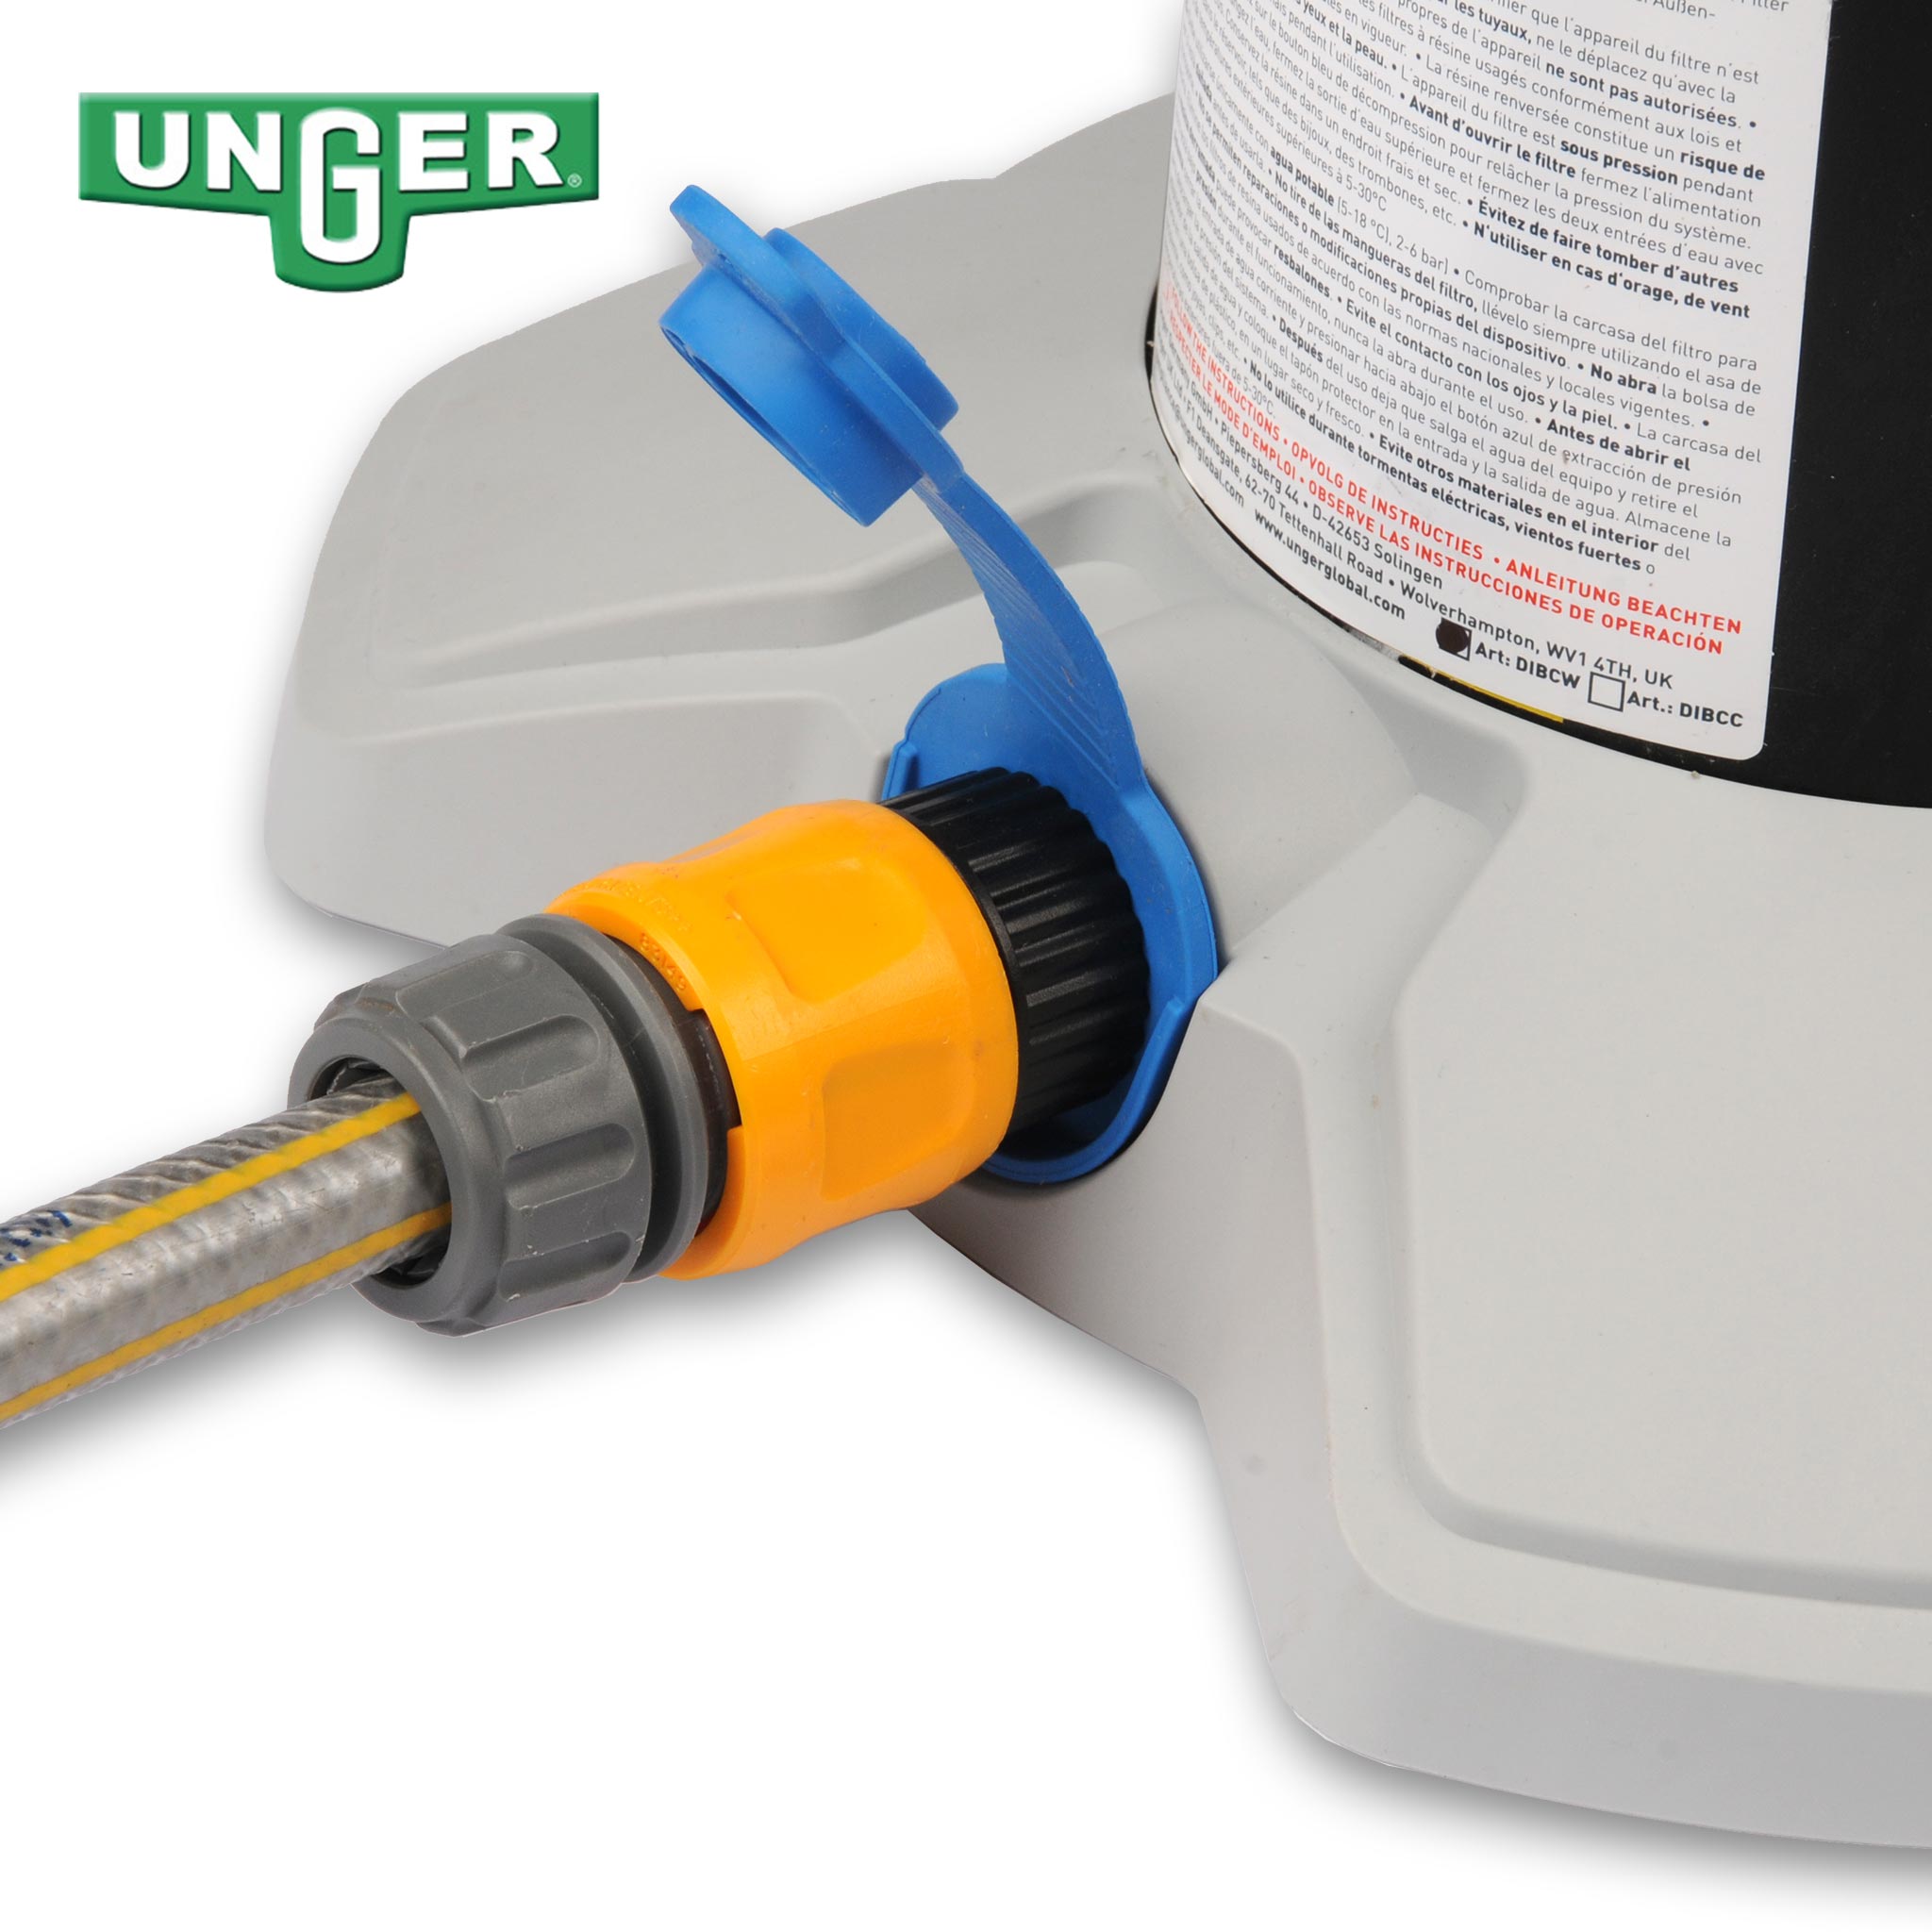 Unger Pure Water Conservatory Cleaning Kit